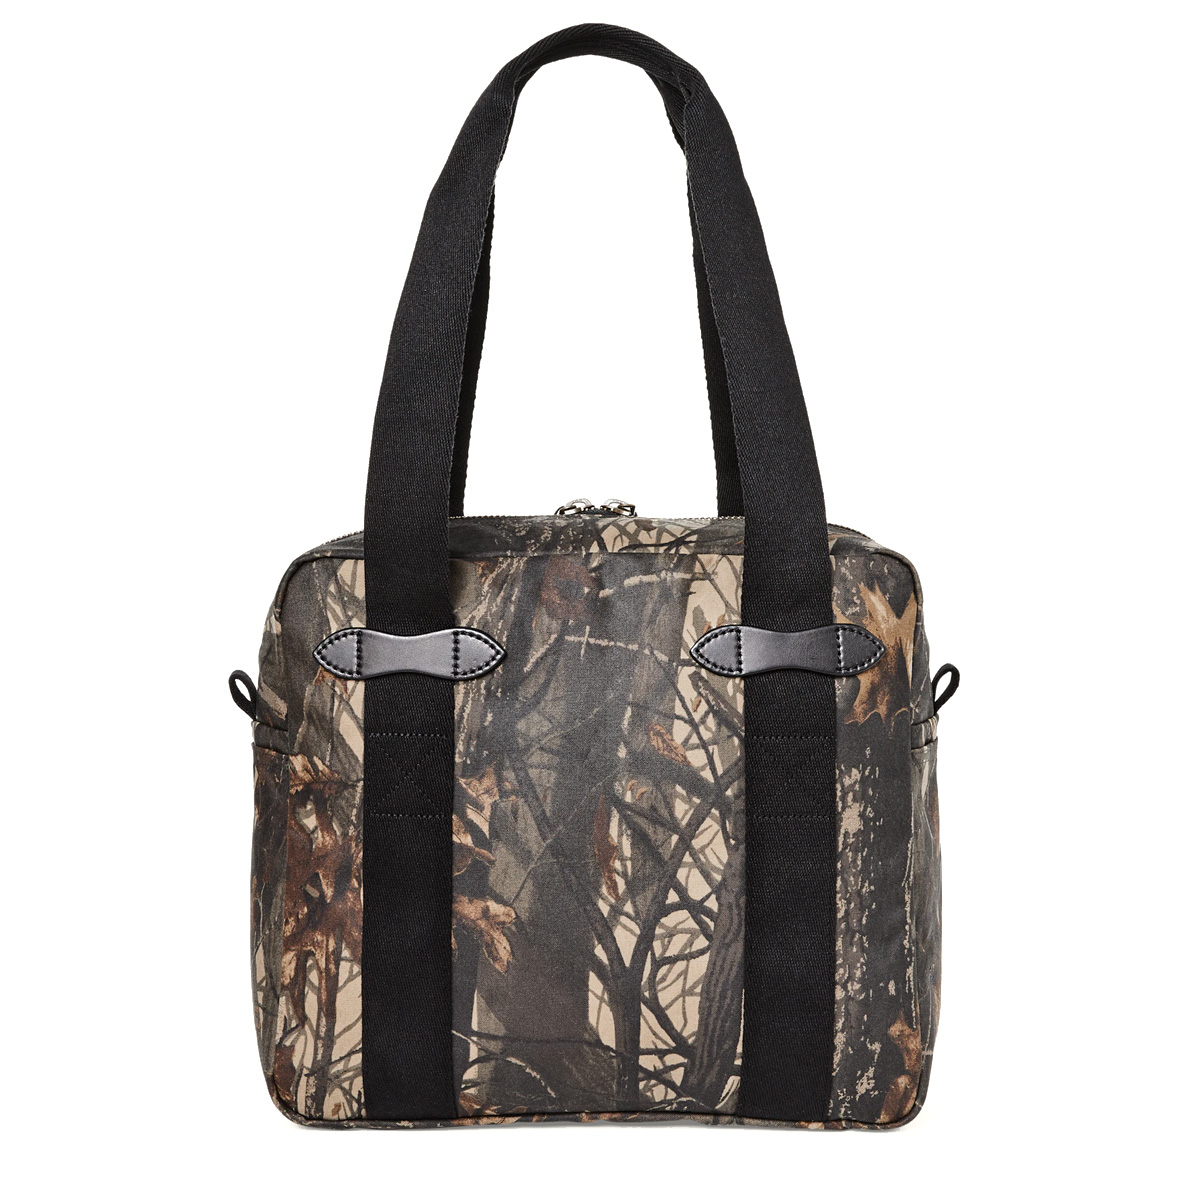 Filson Tin Cloth Tote Bag With Zipper Realtree Hardwoods Camo, a classic-looking shopper designed for easy carrying of belongings